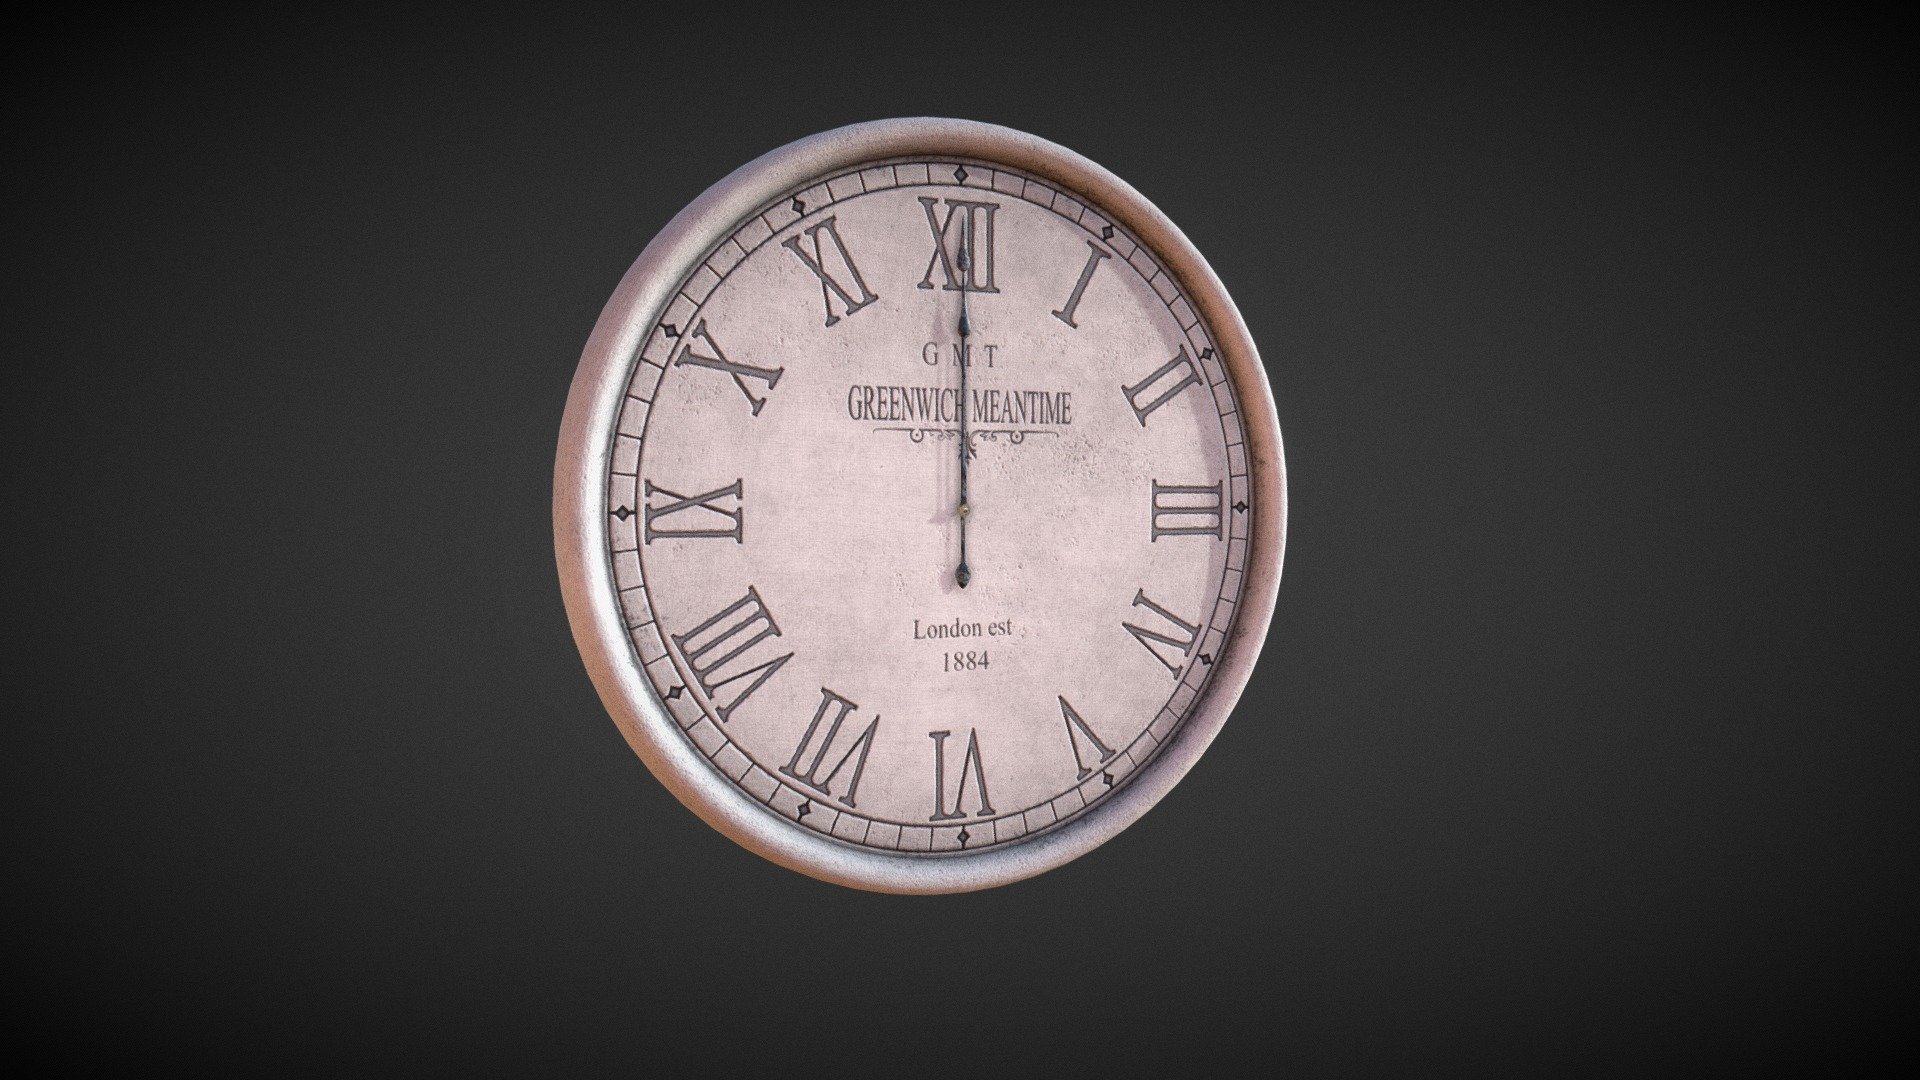 Greenwich Concrete Clock



All quad design.

All Textures created in Substance Painter and exported in 2K PBR formats.

Optimised mesh, all unnecessary edge loops removed.

Game ready - High poly game.

Logically named objects, materials and textures.

Modelled in Blender 2.83.

Textured in Substance Painter 2020.1.3.

Rendered in Marmoset Toolbag 3.

Subdivision ready.
Animated Hands (at 30fps, 300 frames, 10 seconds to complete a 12 Hour cycle).
Highly detailed textures, including dirt build up, rusting and sanding marks.

modelled to real world scales,

Clock - 79.3cm tall, 79.3cm wide, 4.92cm deep

Fully and efficiently UV unwrapped.

Formats included




.Blend - Native

.FBX (Baked Animation)

.OBJ (No Animation)

Objects in each file format




Clock

Minute Hand

Hour Hand

Textures included in .png format.

Clock - 2K -




Diffuse

Roughness

Normal - (OpenGL Unity standard, Invert green channel to convert to DirectX Unreal standard)

Metallic
 - Greenwich Concrete Clock - Buy Royalty Free 3D model by PBR3D 3d model